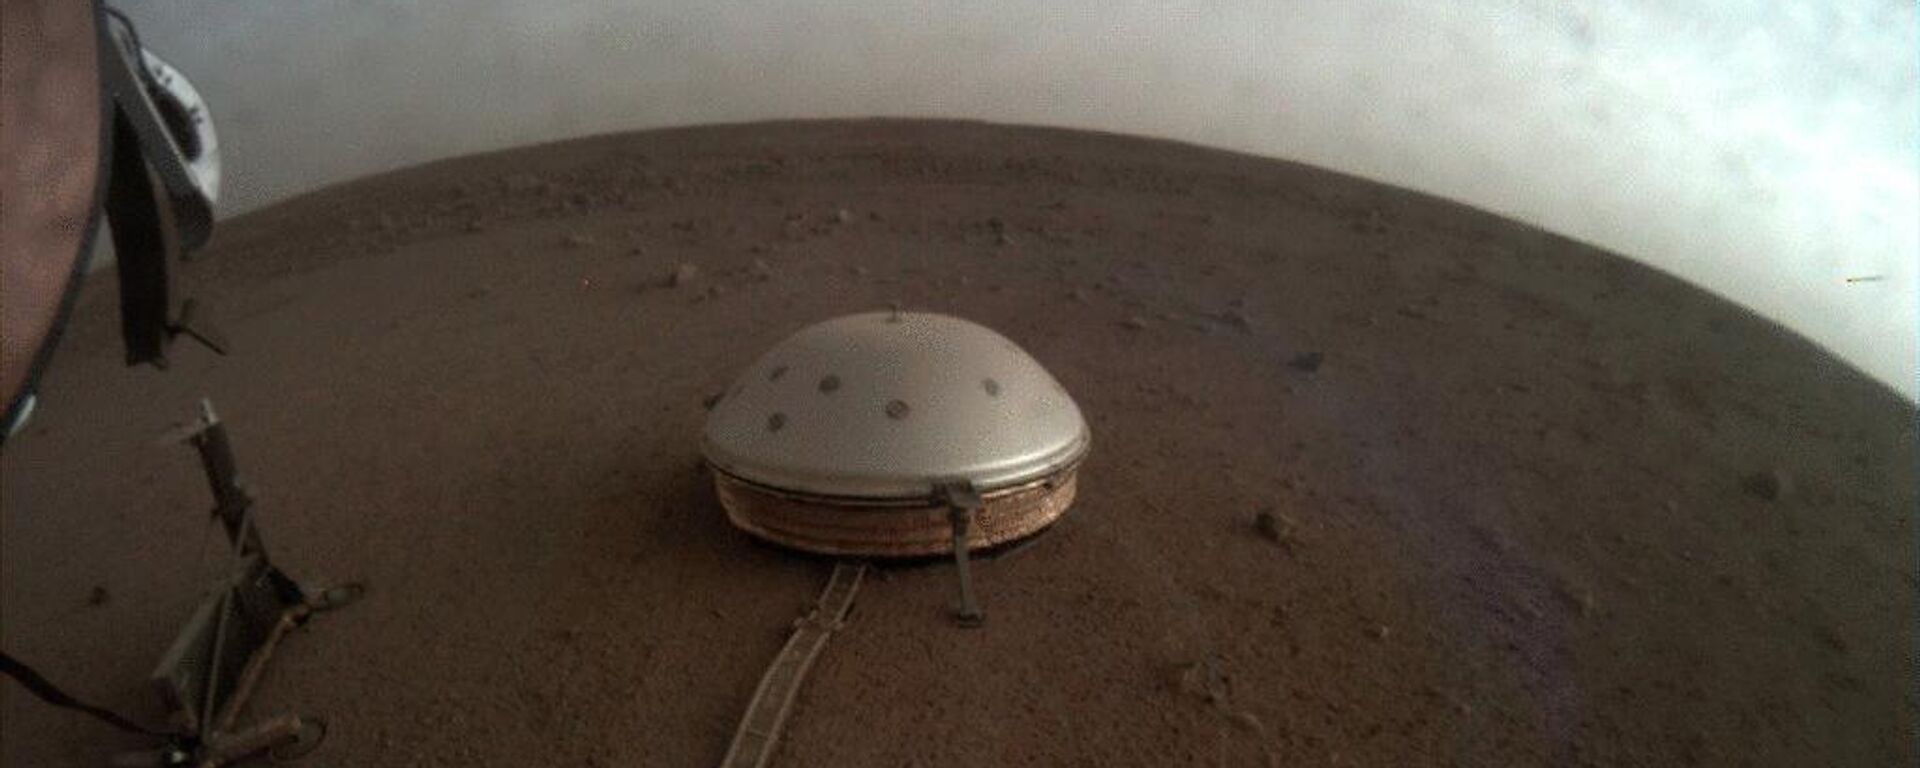 In this undated photo made available by NASA on Thursday,  July 22, 2021, clouds drift over the dome-covered SEIS seismometer of the InSight lander on the surface of Mars. - Sputnik International, 1920, 10.05.2022